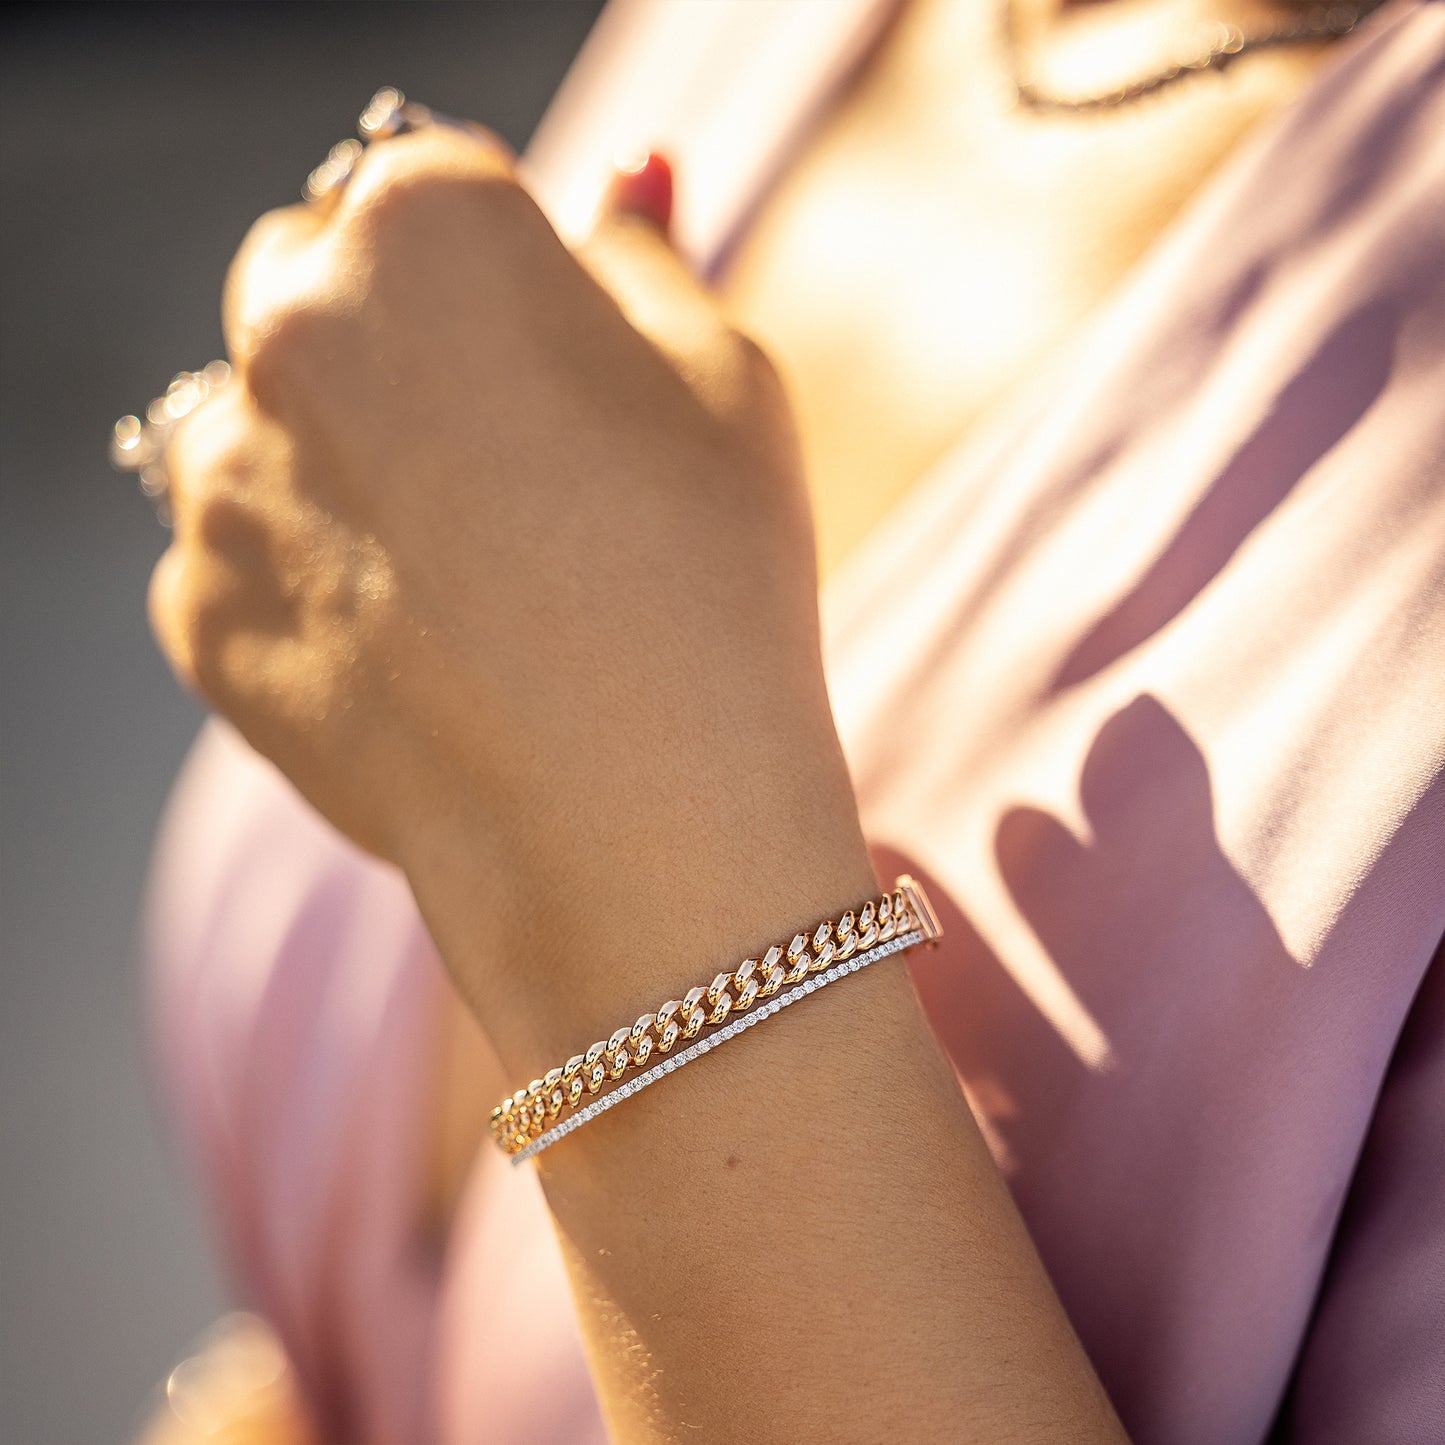 Rose and White Gold Chain Bangle with Diamonds